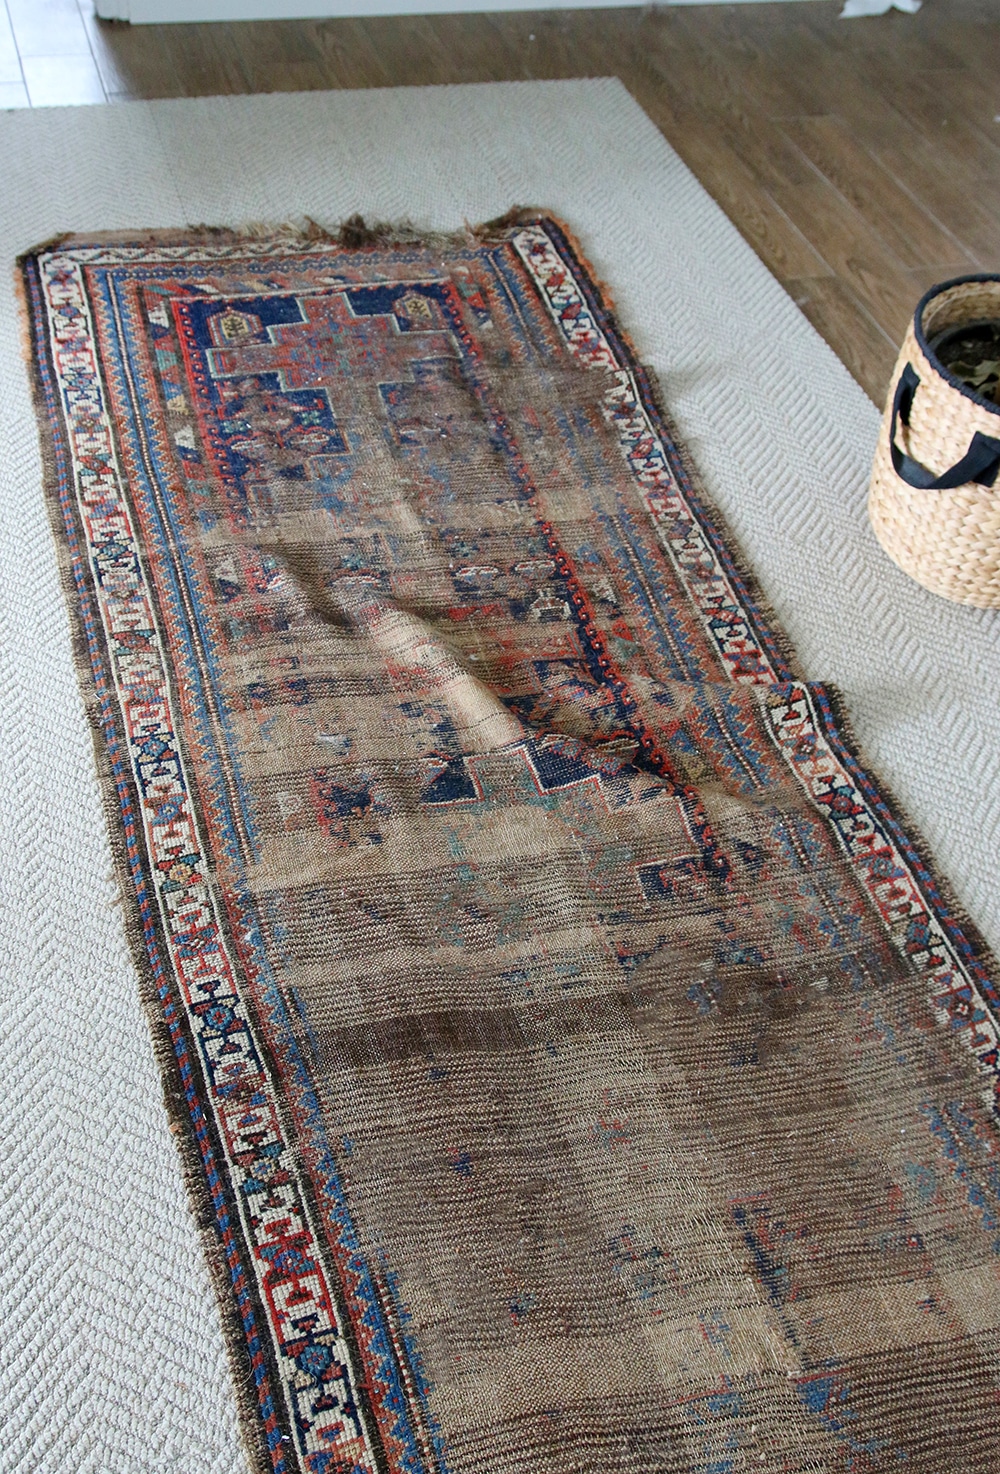 5 Tips For Keeping Area Rugs Exactly, Stop Rugs Slipping On Wooden Floors